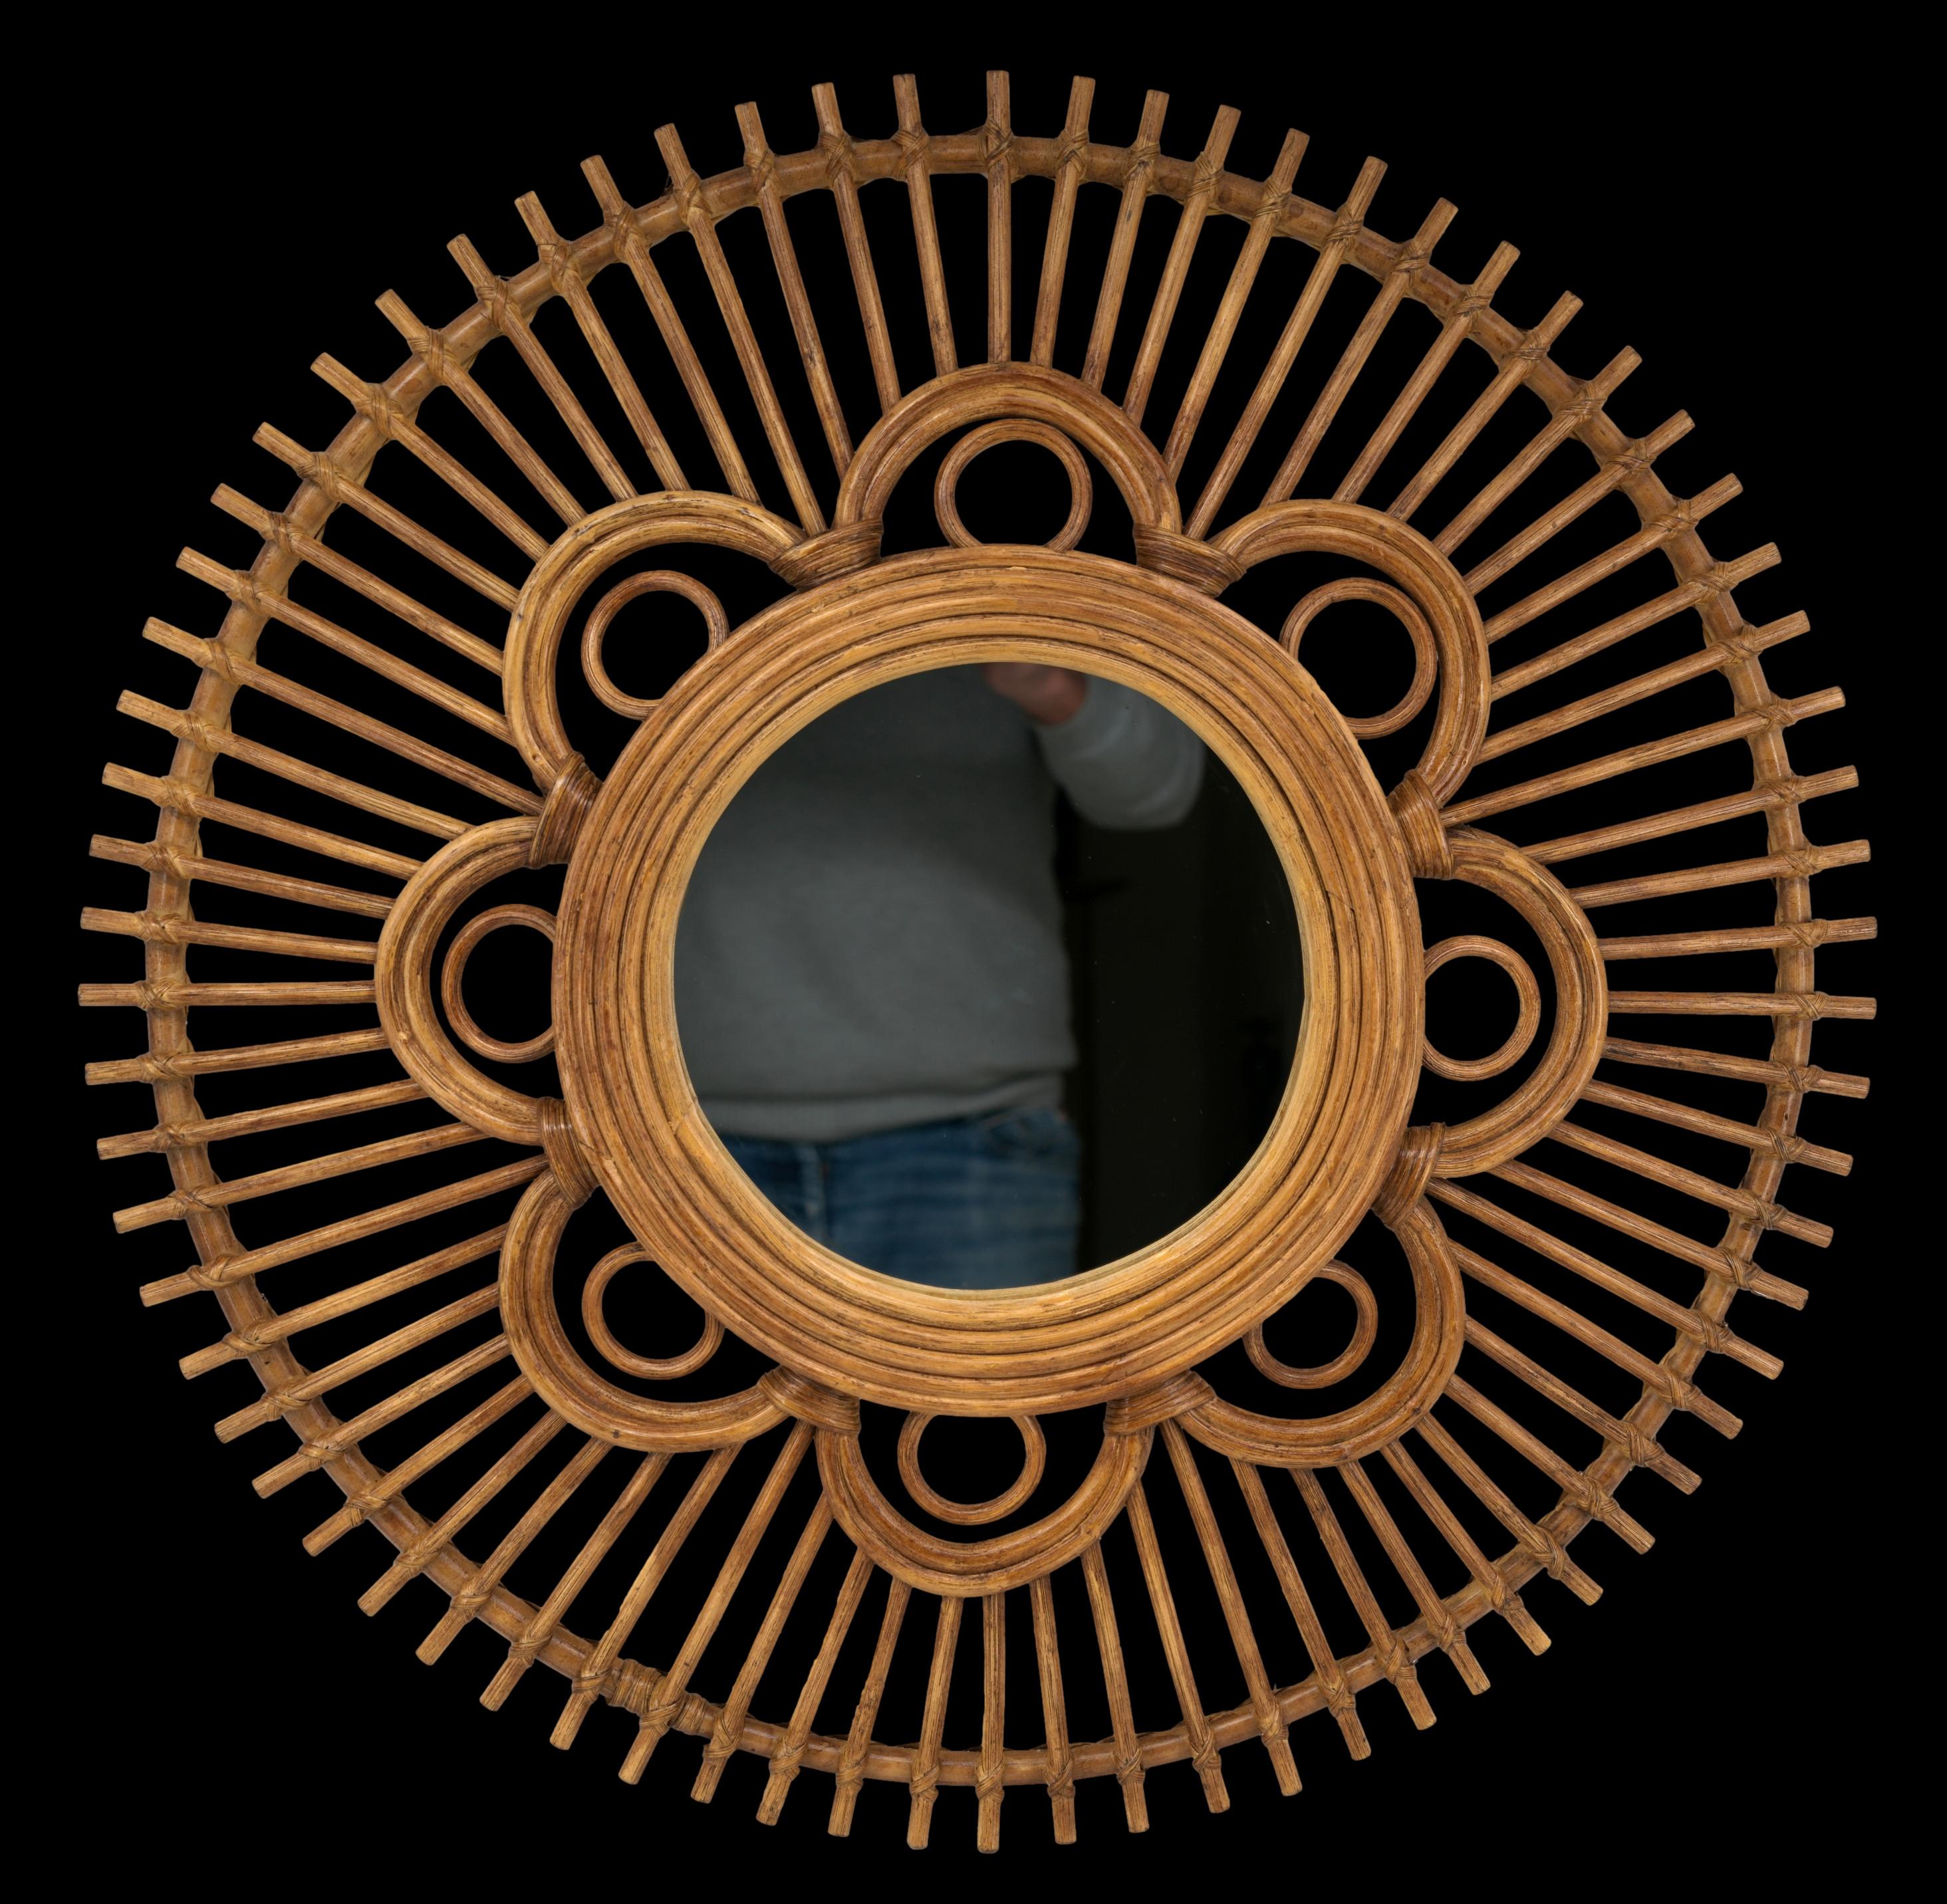 French Mid-century wall mirror, France, 1950s. Bamboo and rattan mirror with radiating floral decoration. Diameter: 25.6